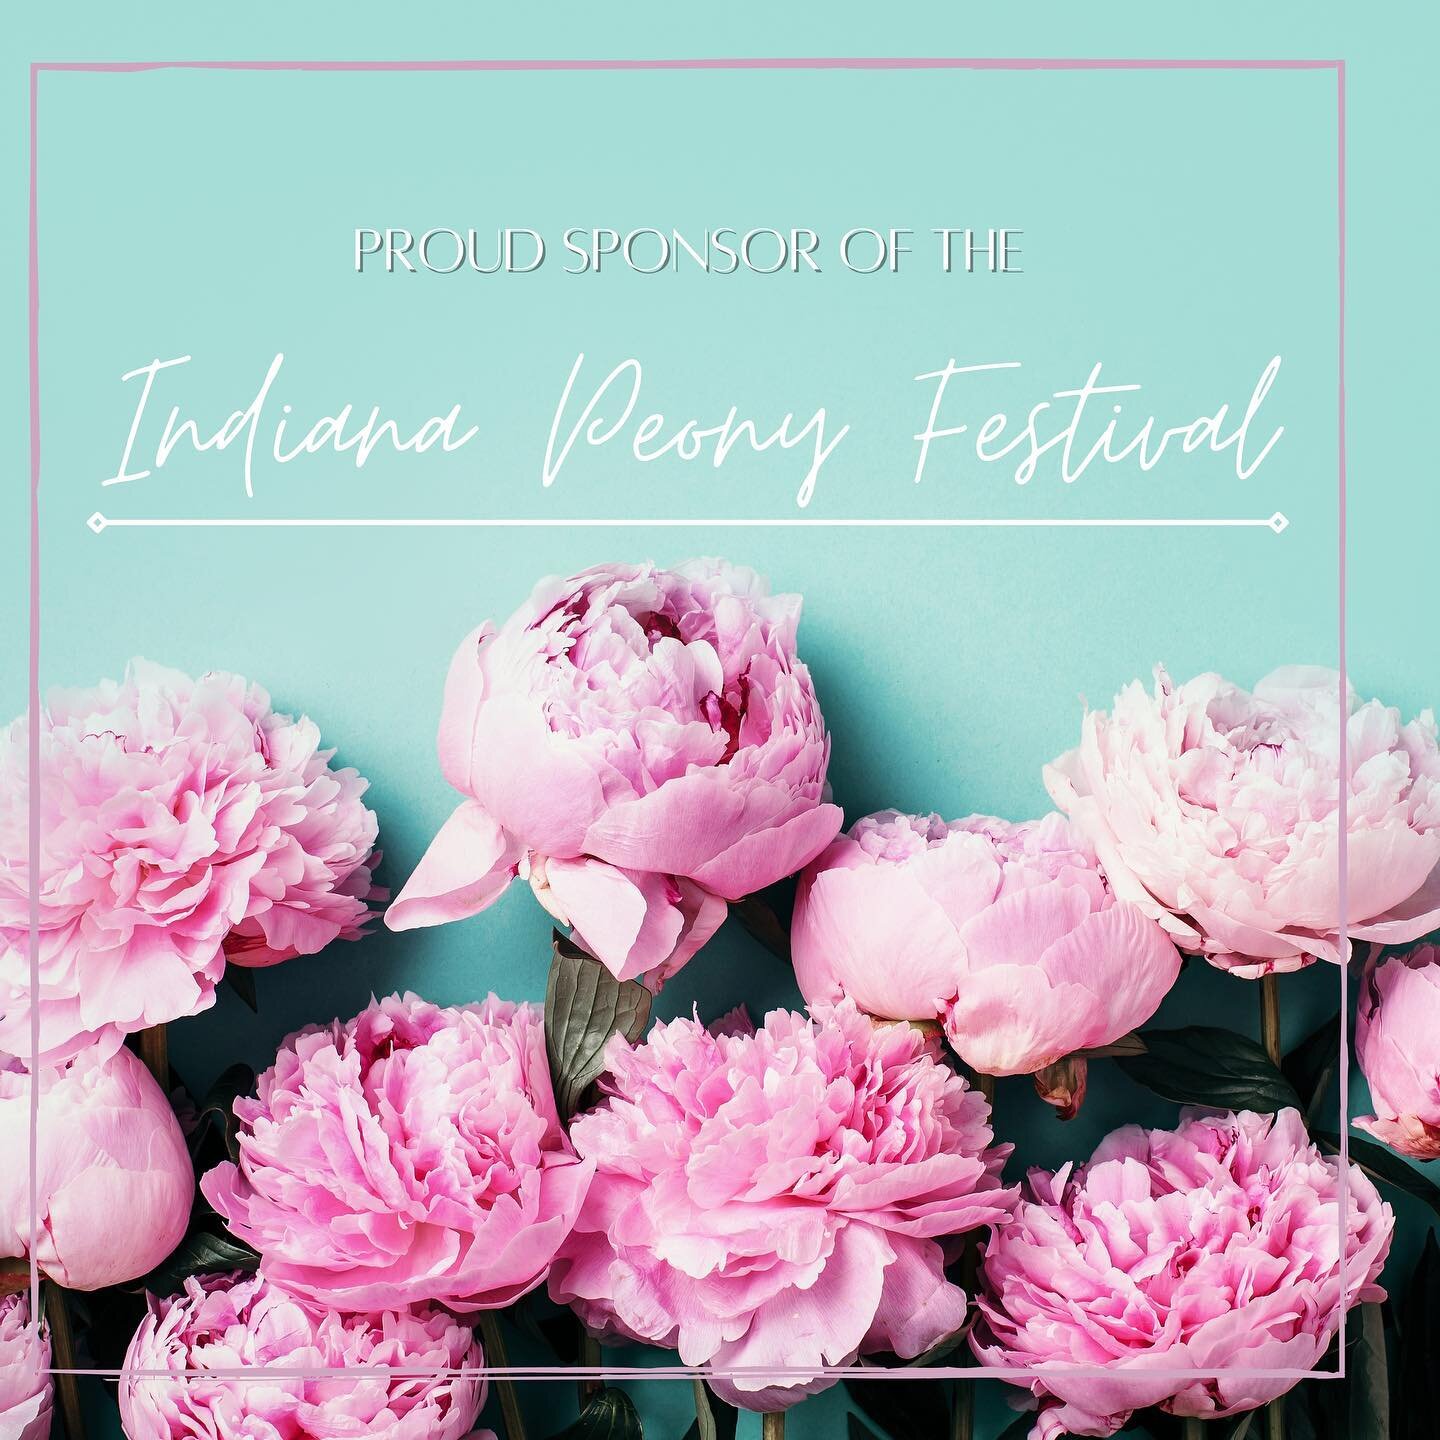 Fidelitek is a proud sponsor of this years @indianapeonyfestival !!! We are so excited to be apart of something in the community that spreads so much joy and light. Looking forward to this years event and can&rsquo;t wait to see you there! 

#indiana